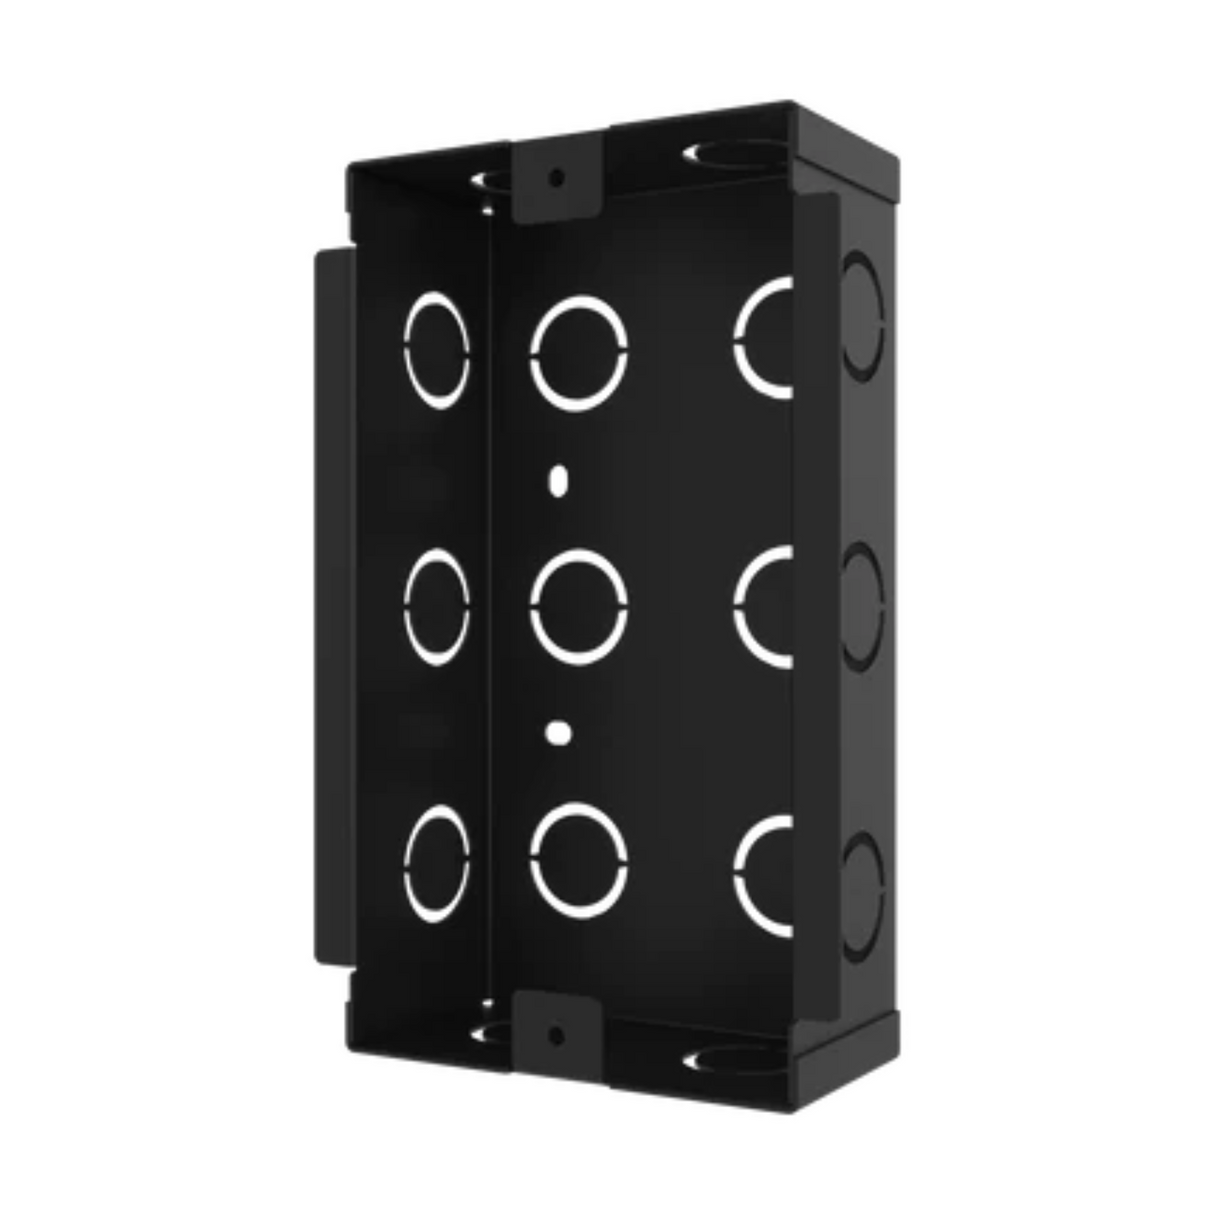 AKUVOX IN-WALL BOX FOR R20A